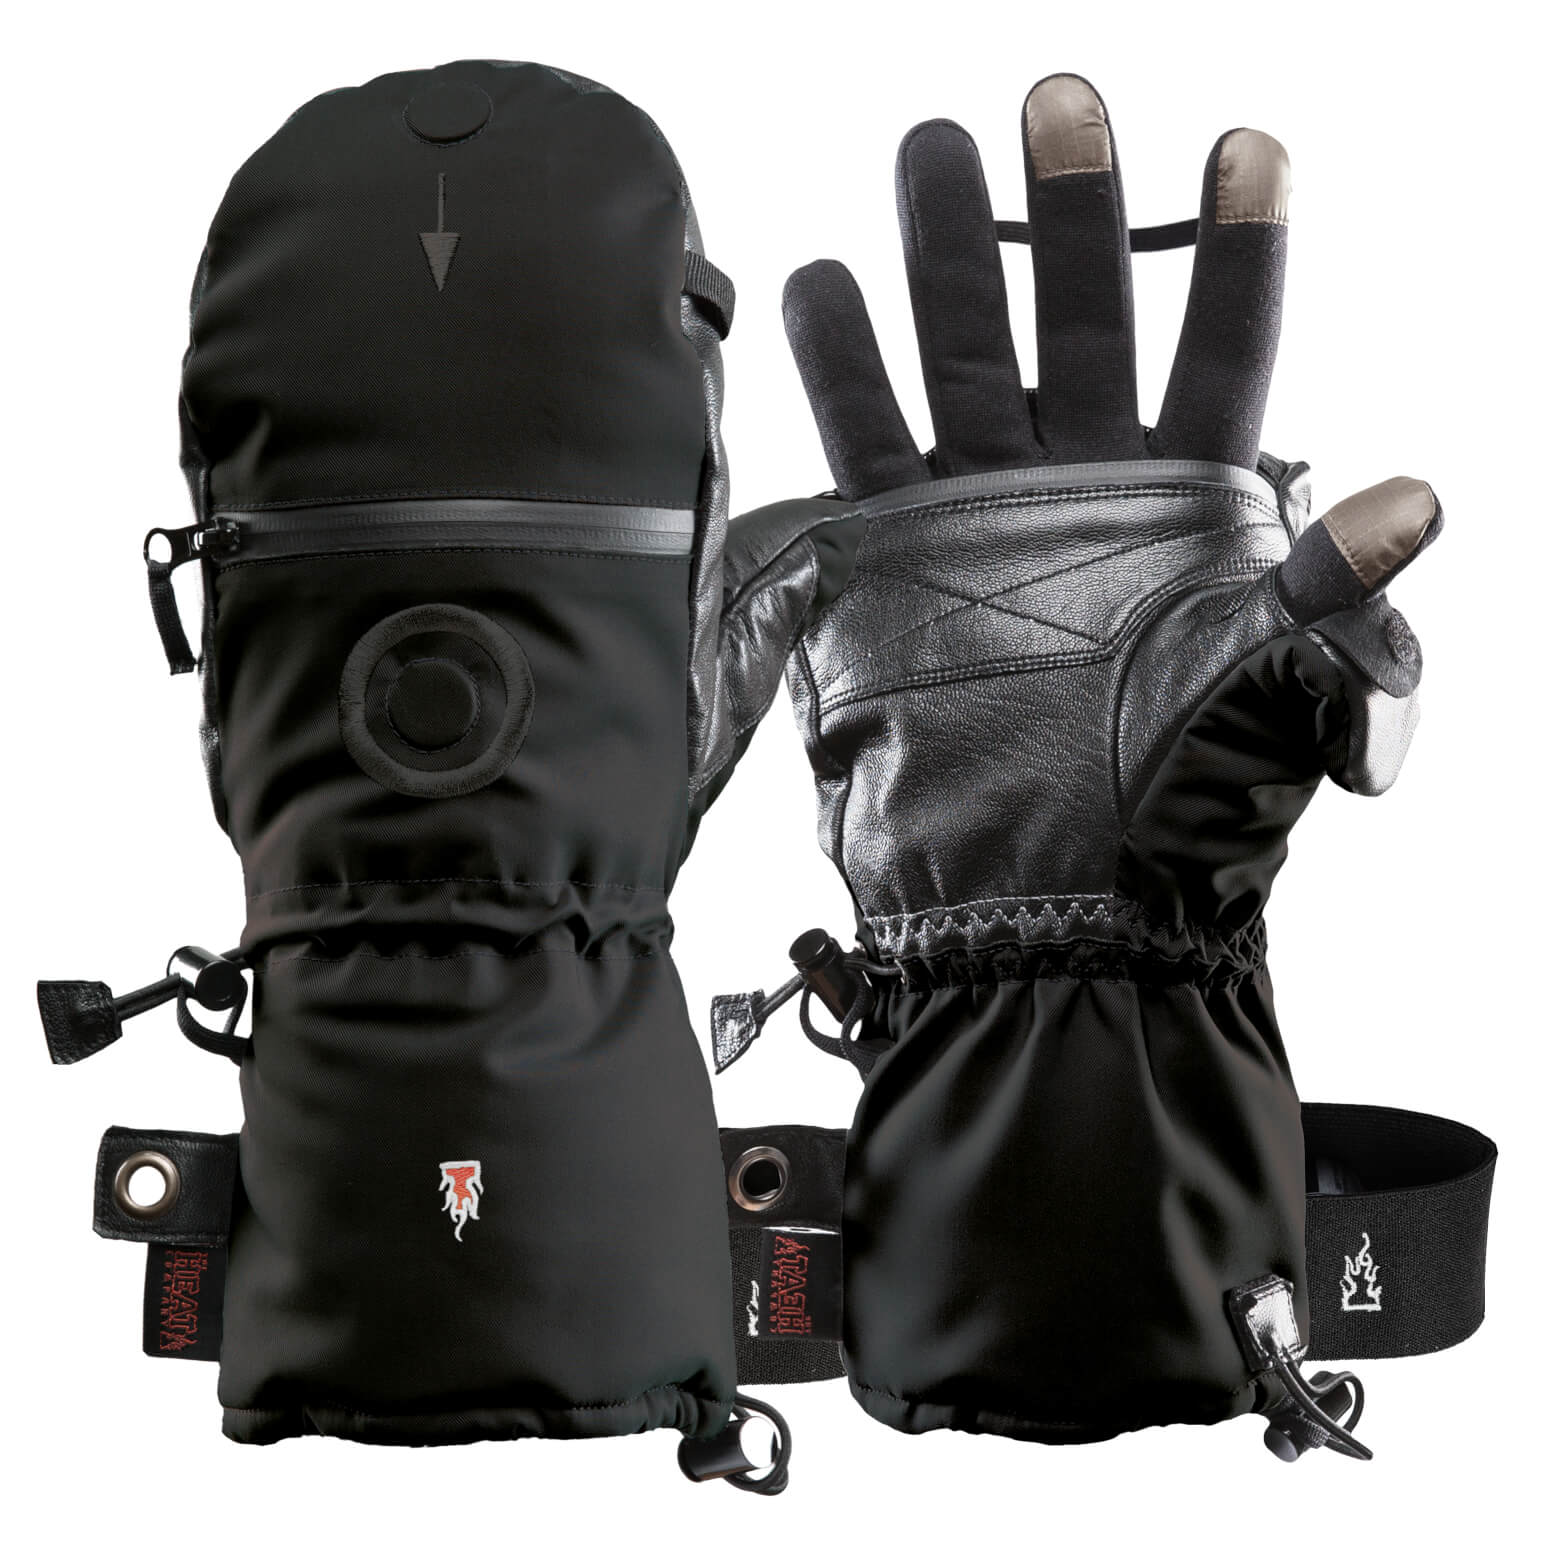 FIVE HG-3 WP HEATED GLOVES GFHG30005 SIZE LARGE 10 